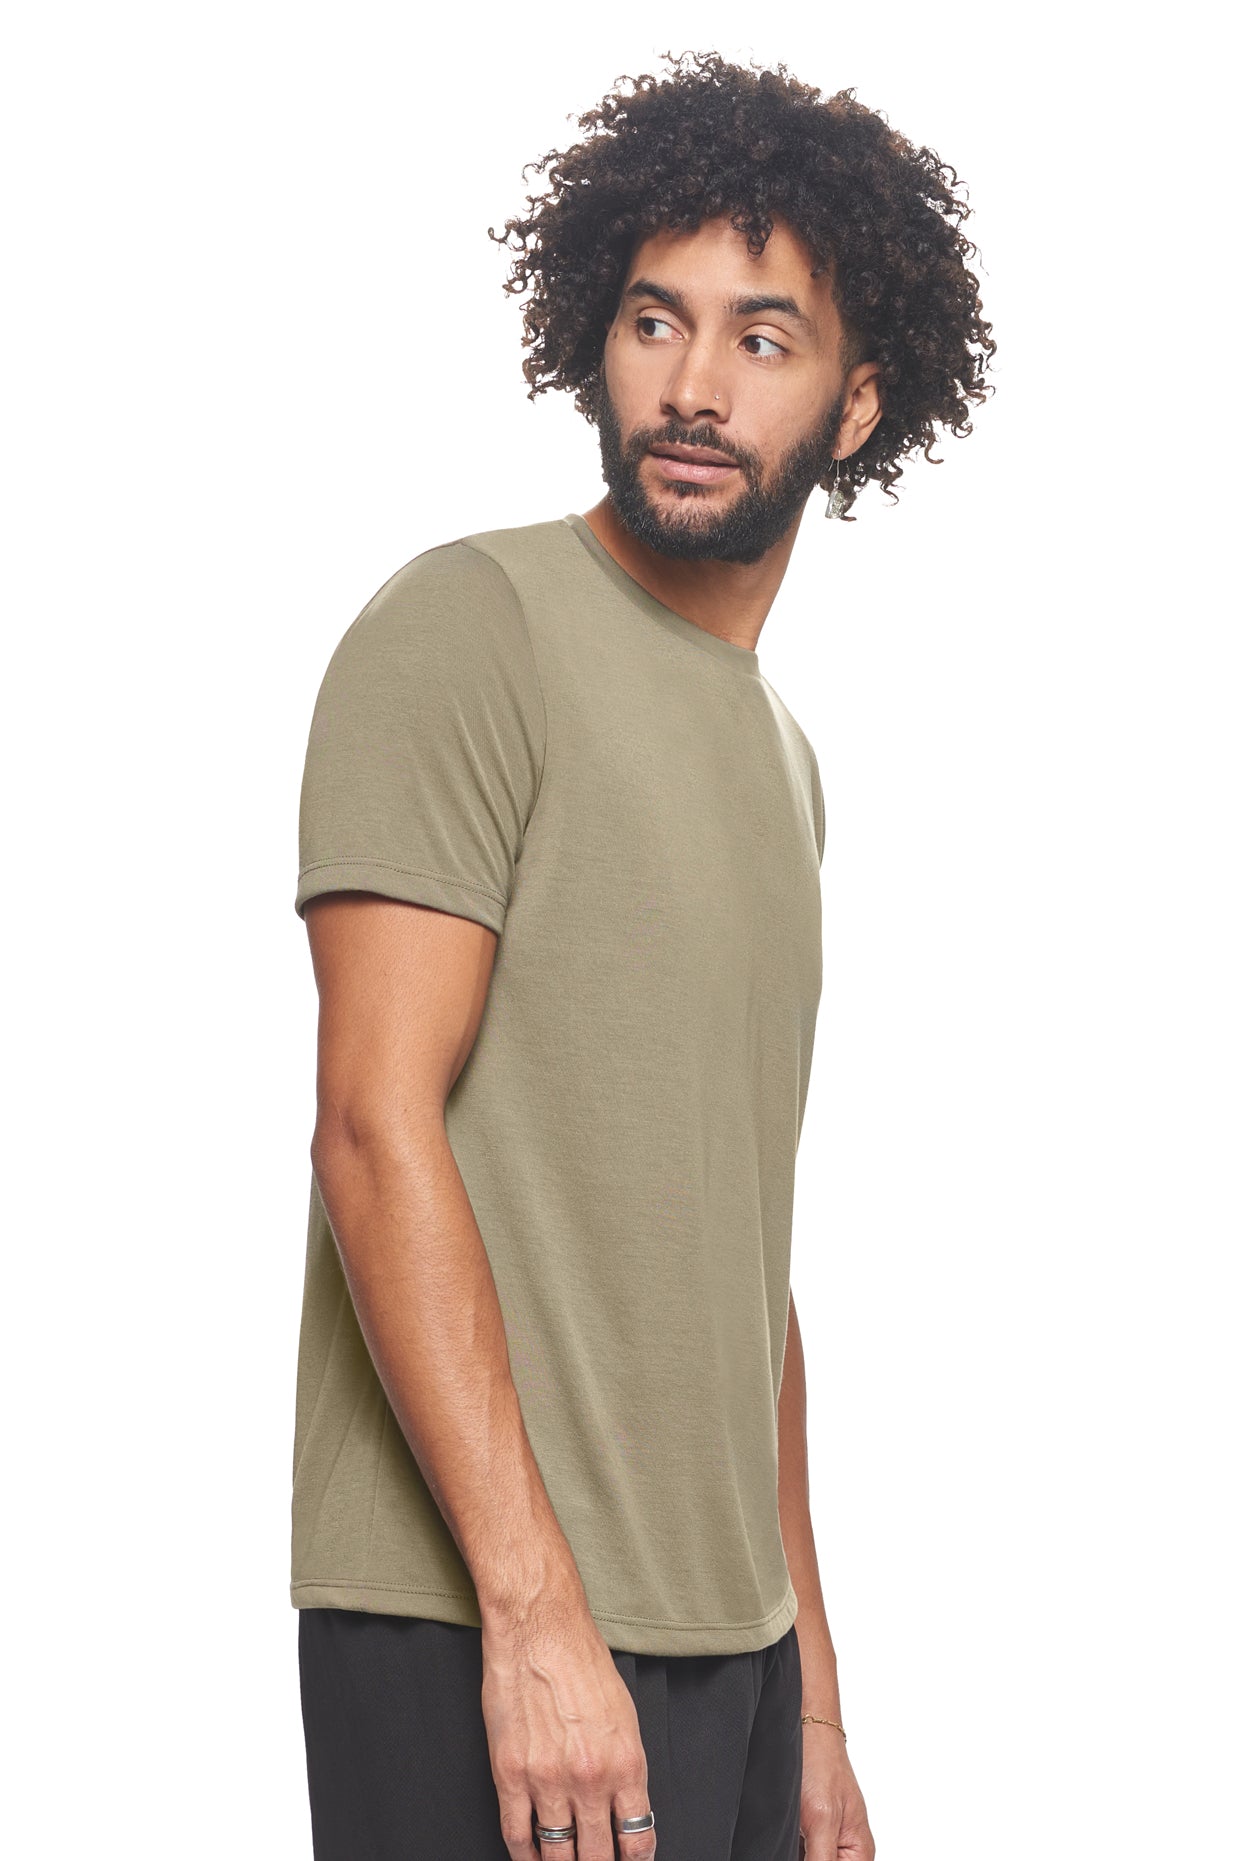 Expert Brand Retail Super Soft Eco-Friendly Performance Apparel Fashion Sportswear Men's Crewneck T-Shirt Made in USA olive green 4#color_olive